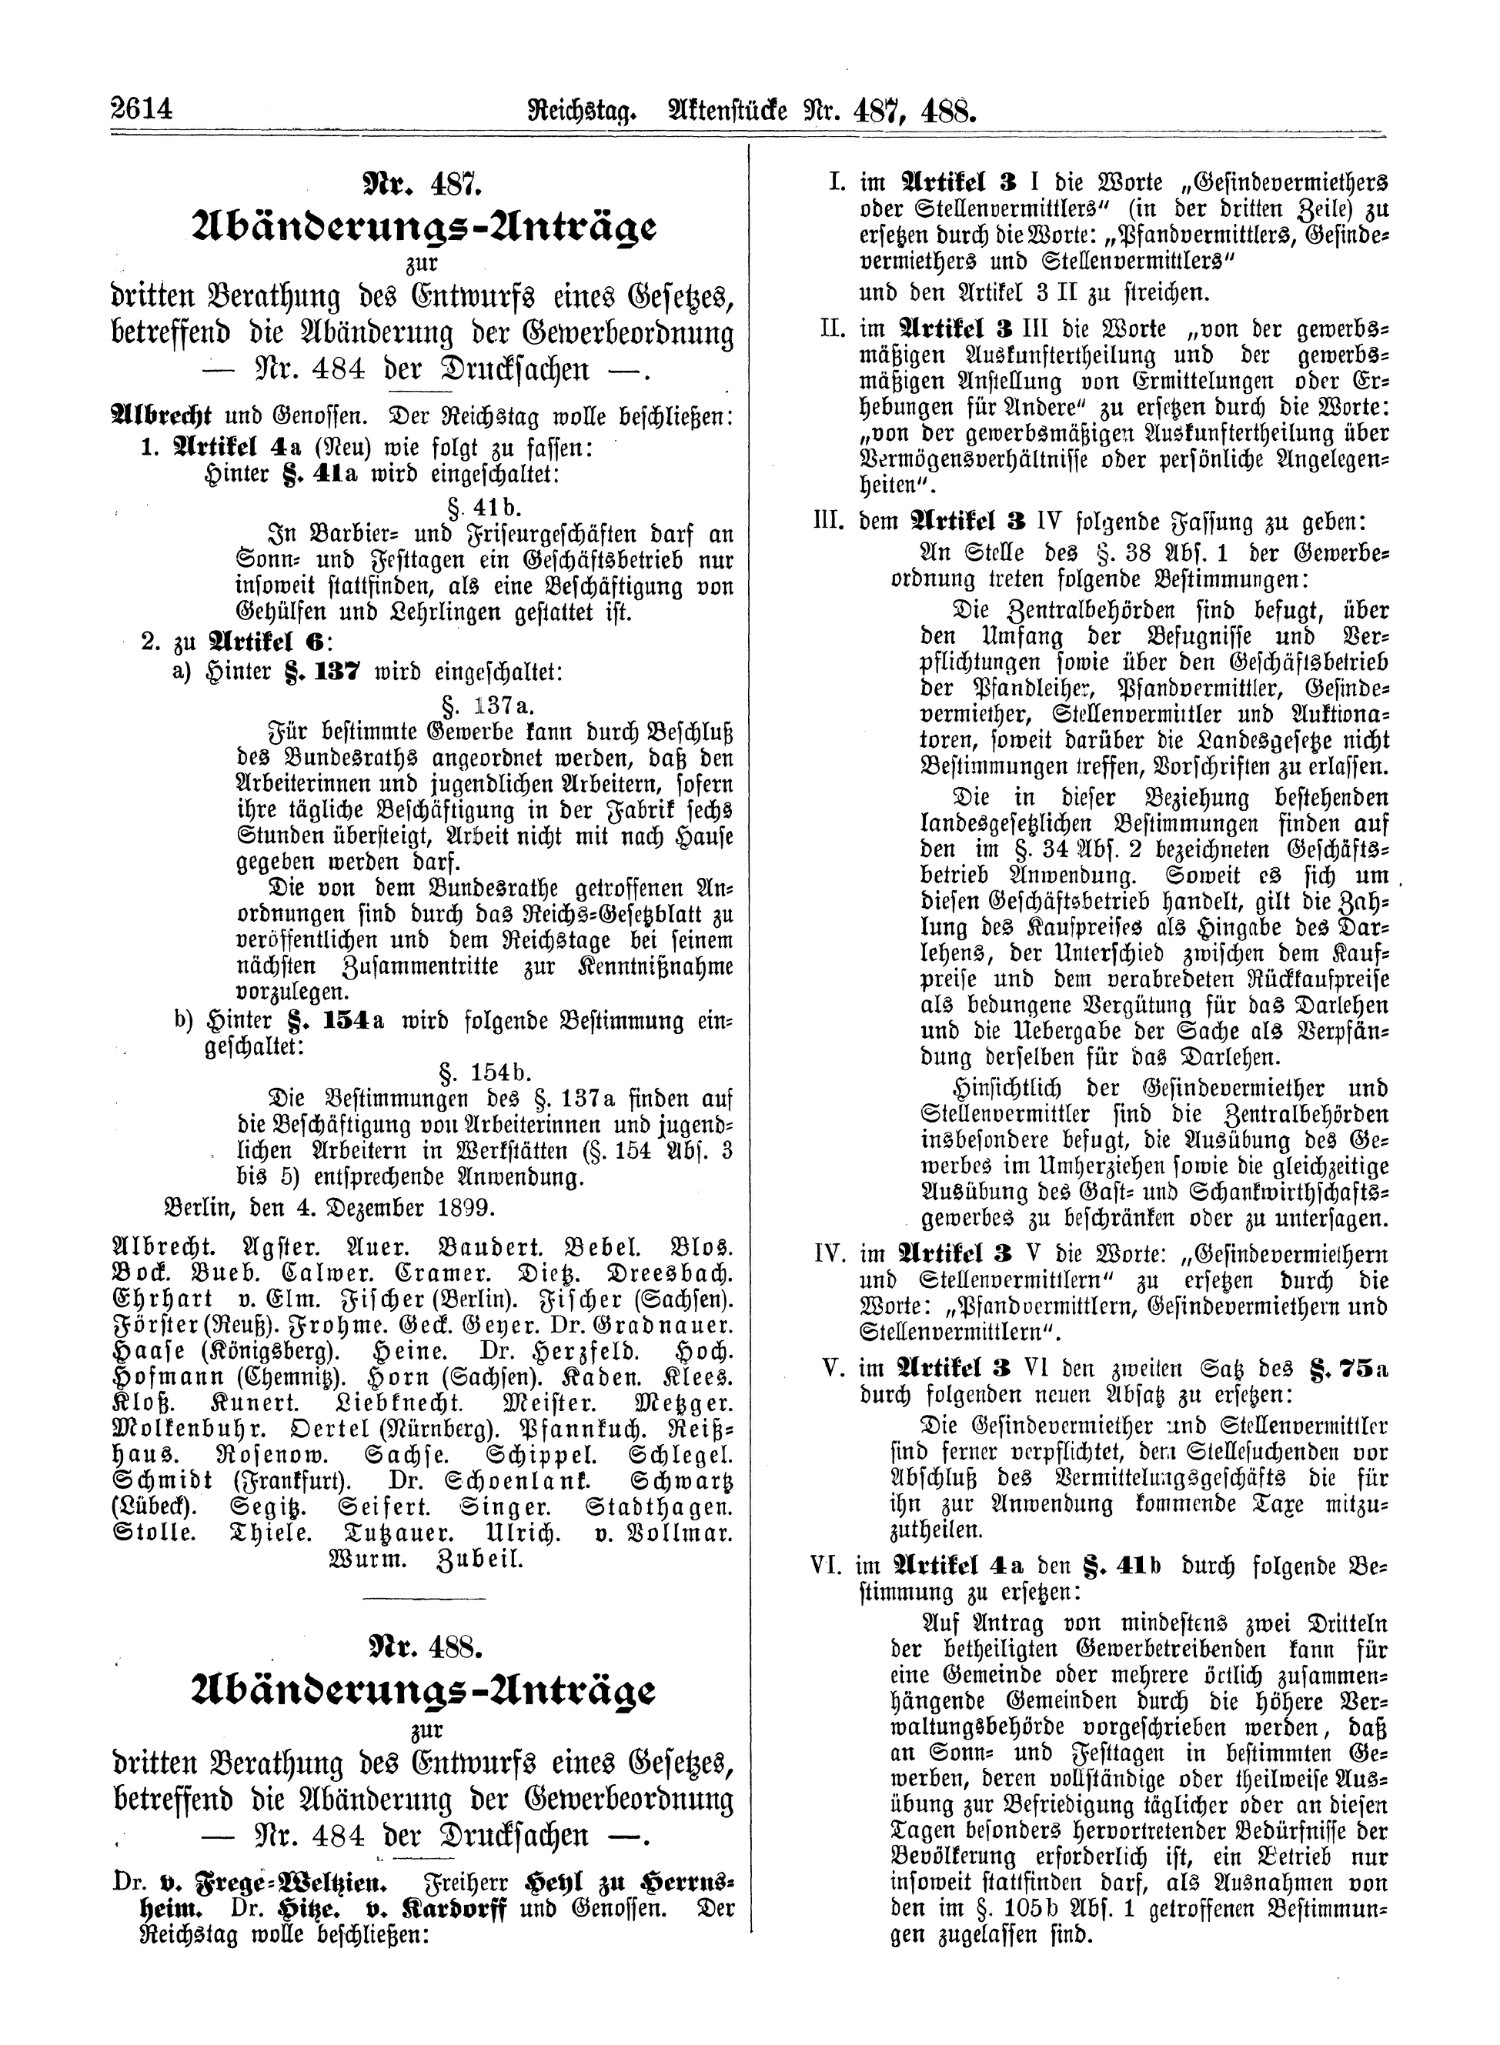 Scan of page 2614